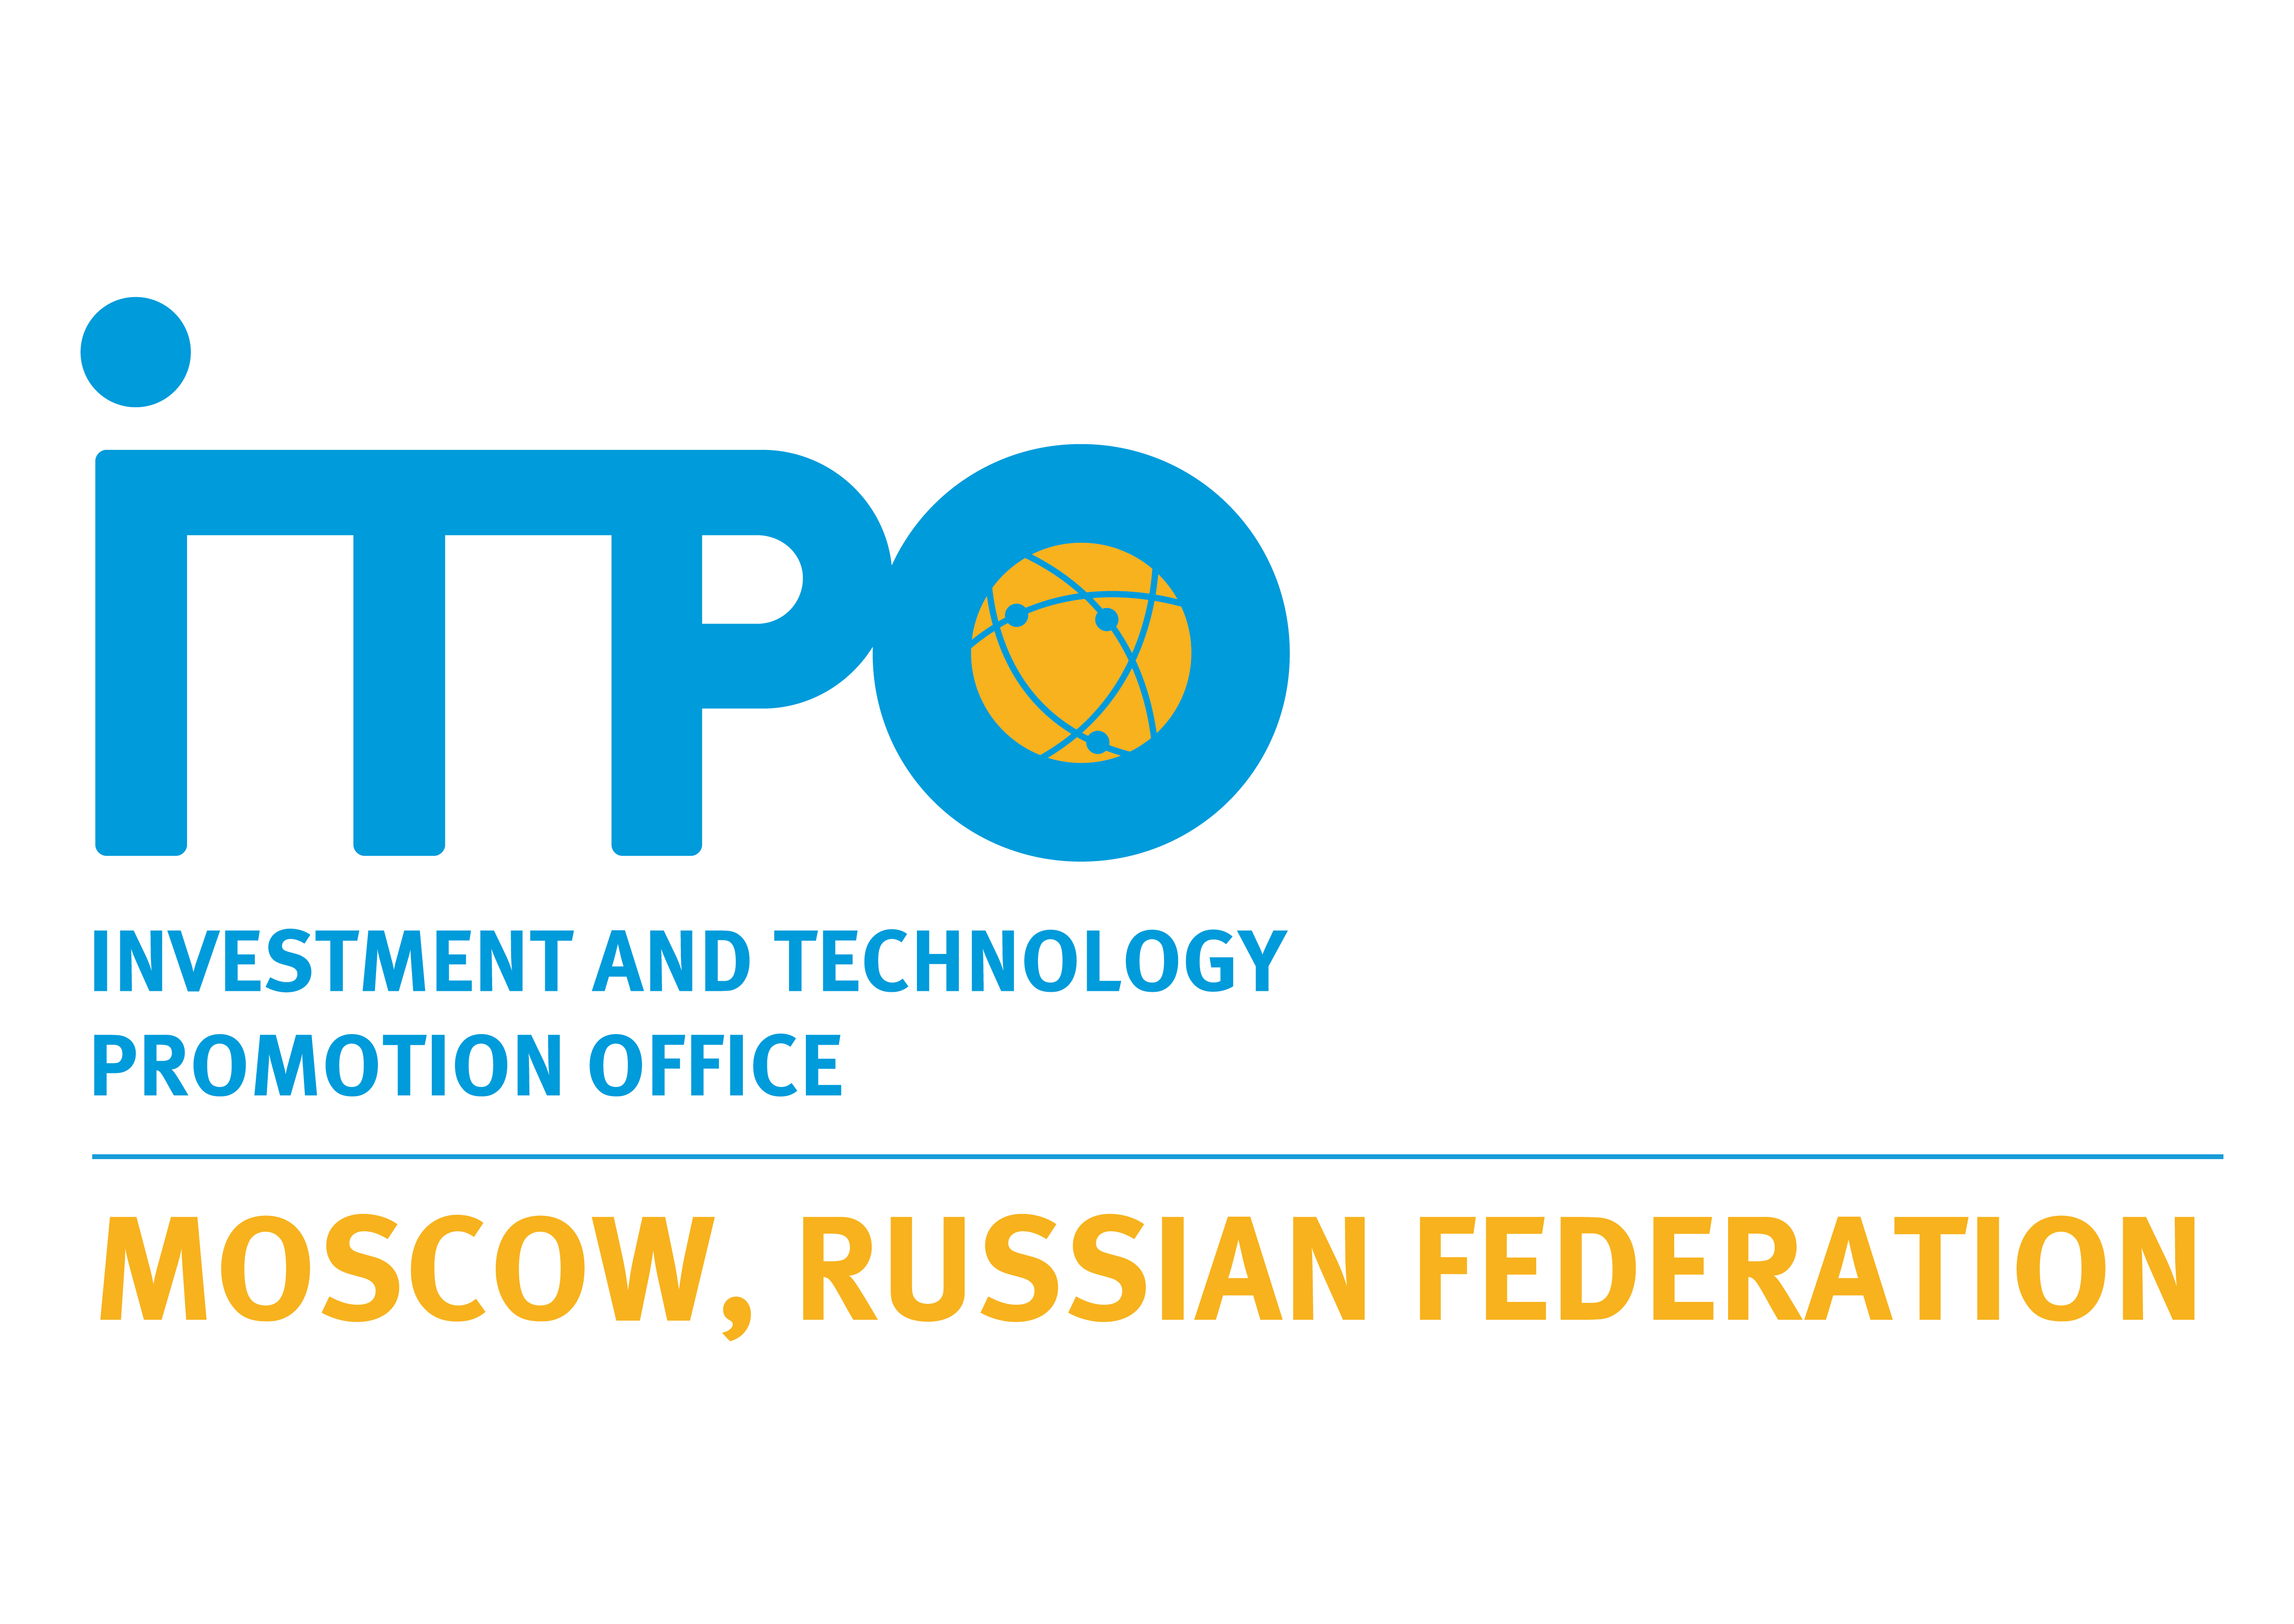 ITPO_Russian_Federation_Moscow_logo